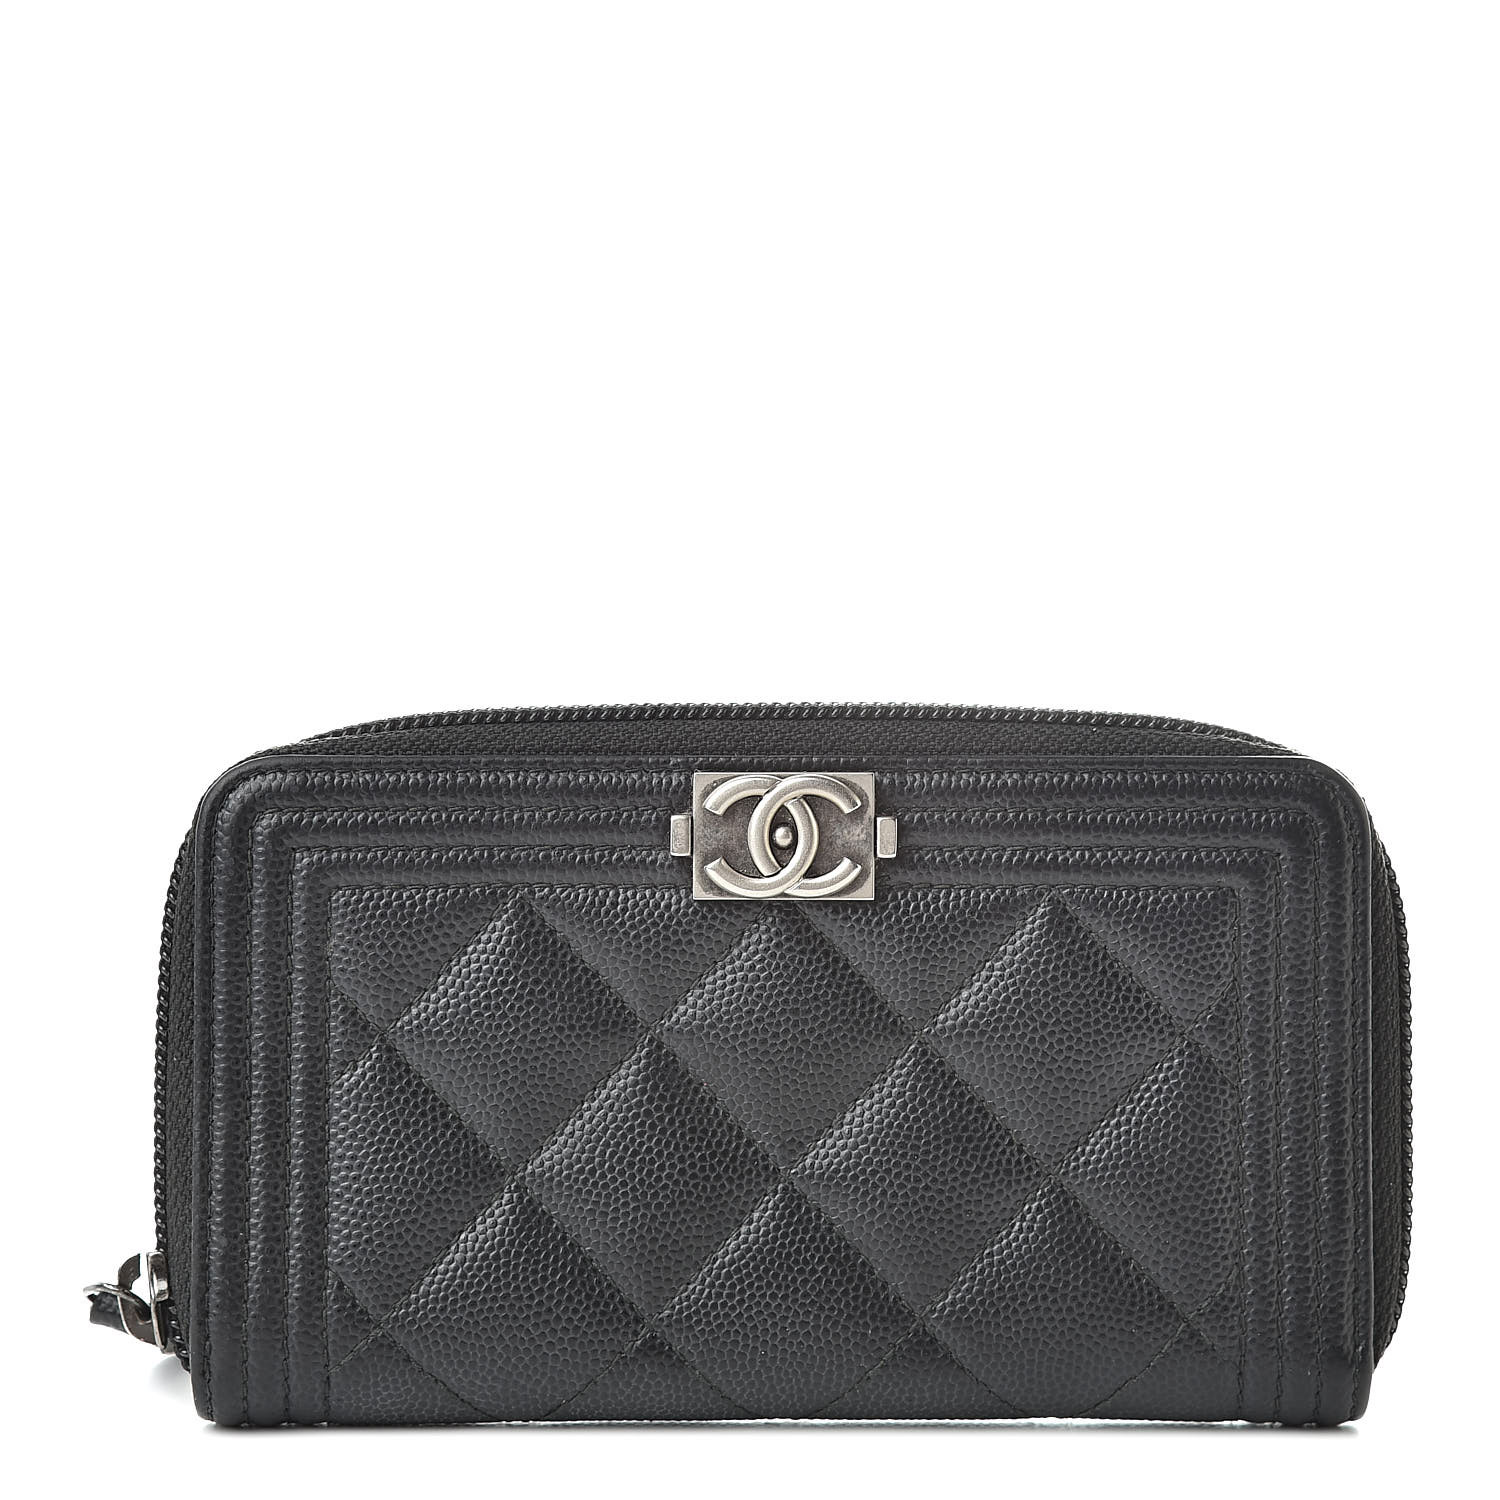 CHANEL Caviar Quilted Small Boy Zip Around Wallet Black 510223